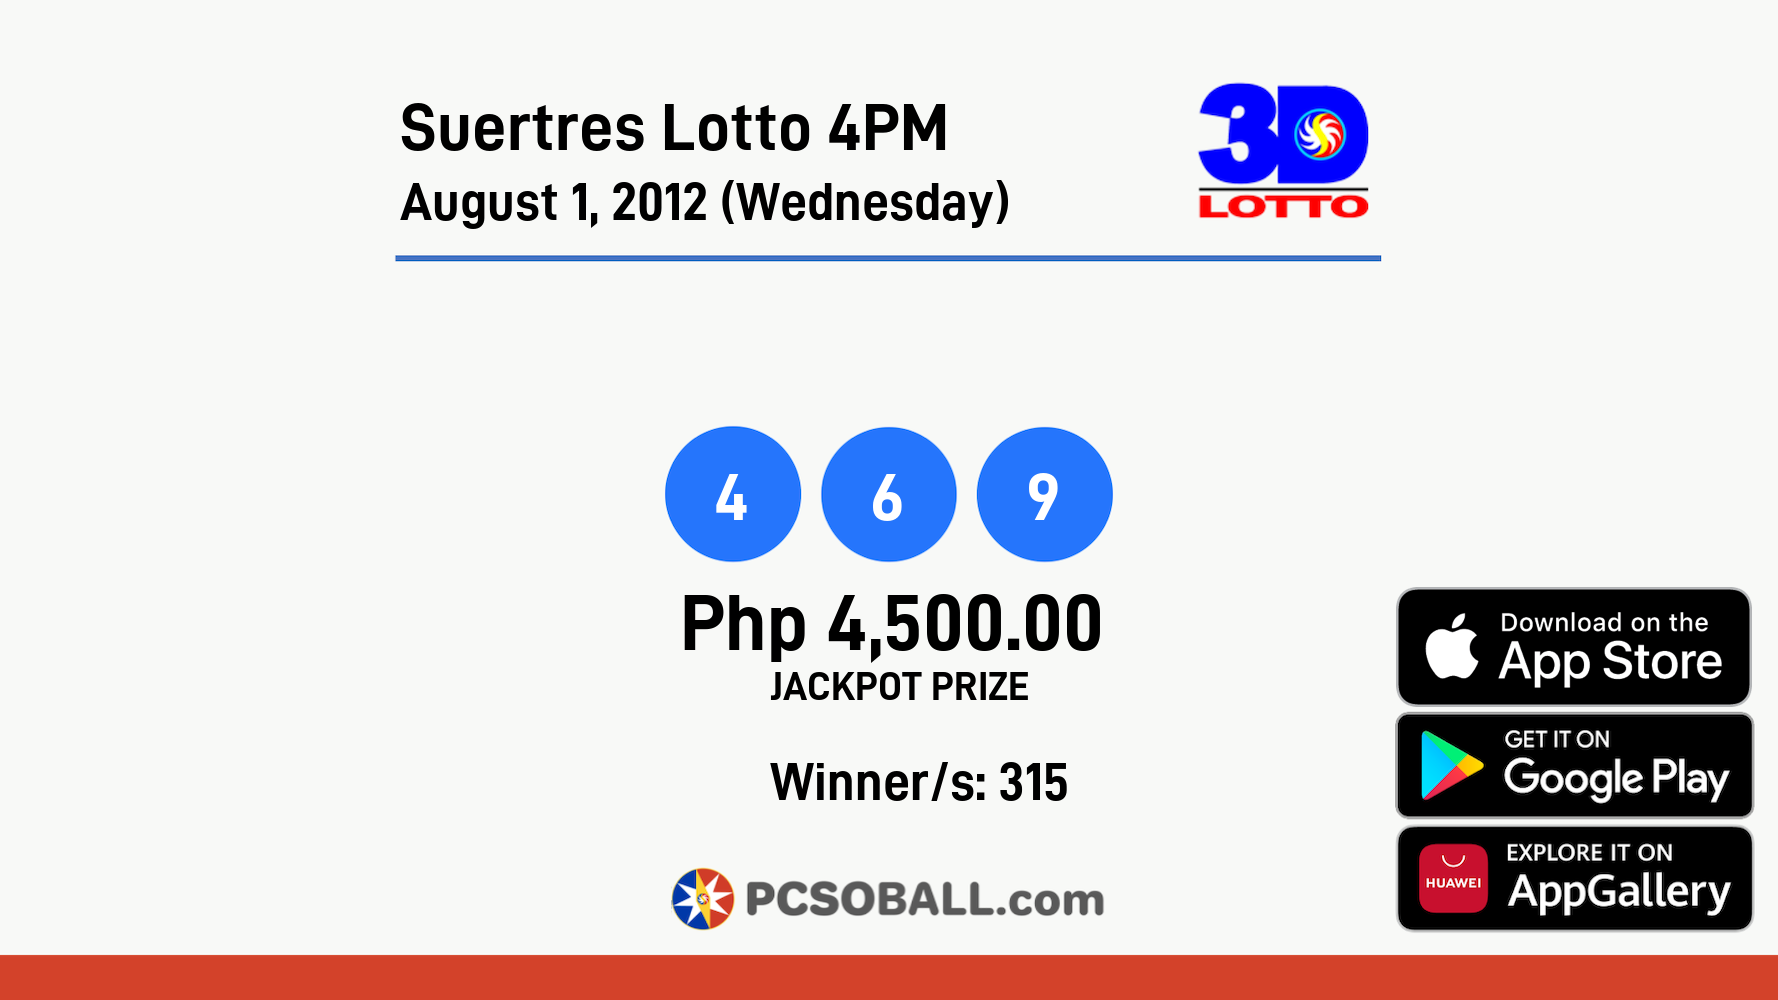 Suertres Lotto 4PM August 1, 2012 (Wednesday) Result